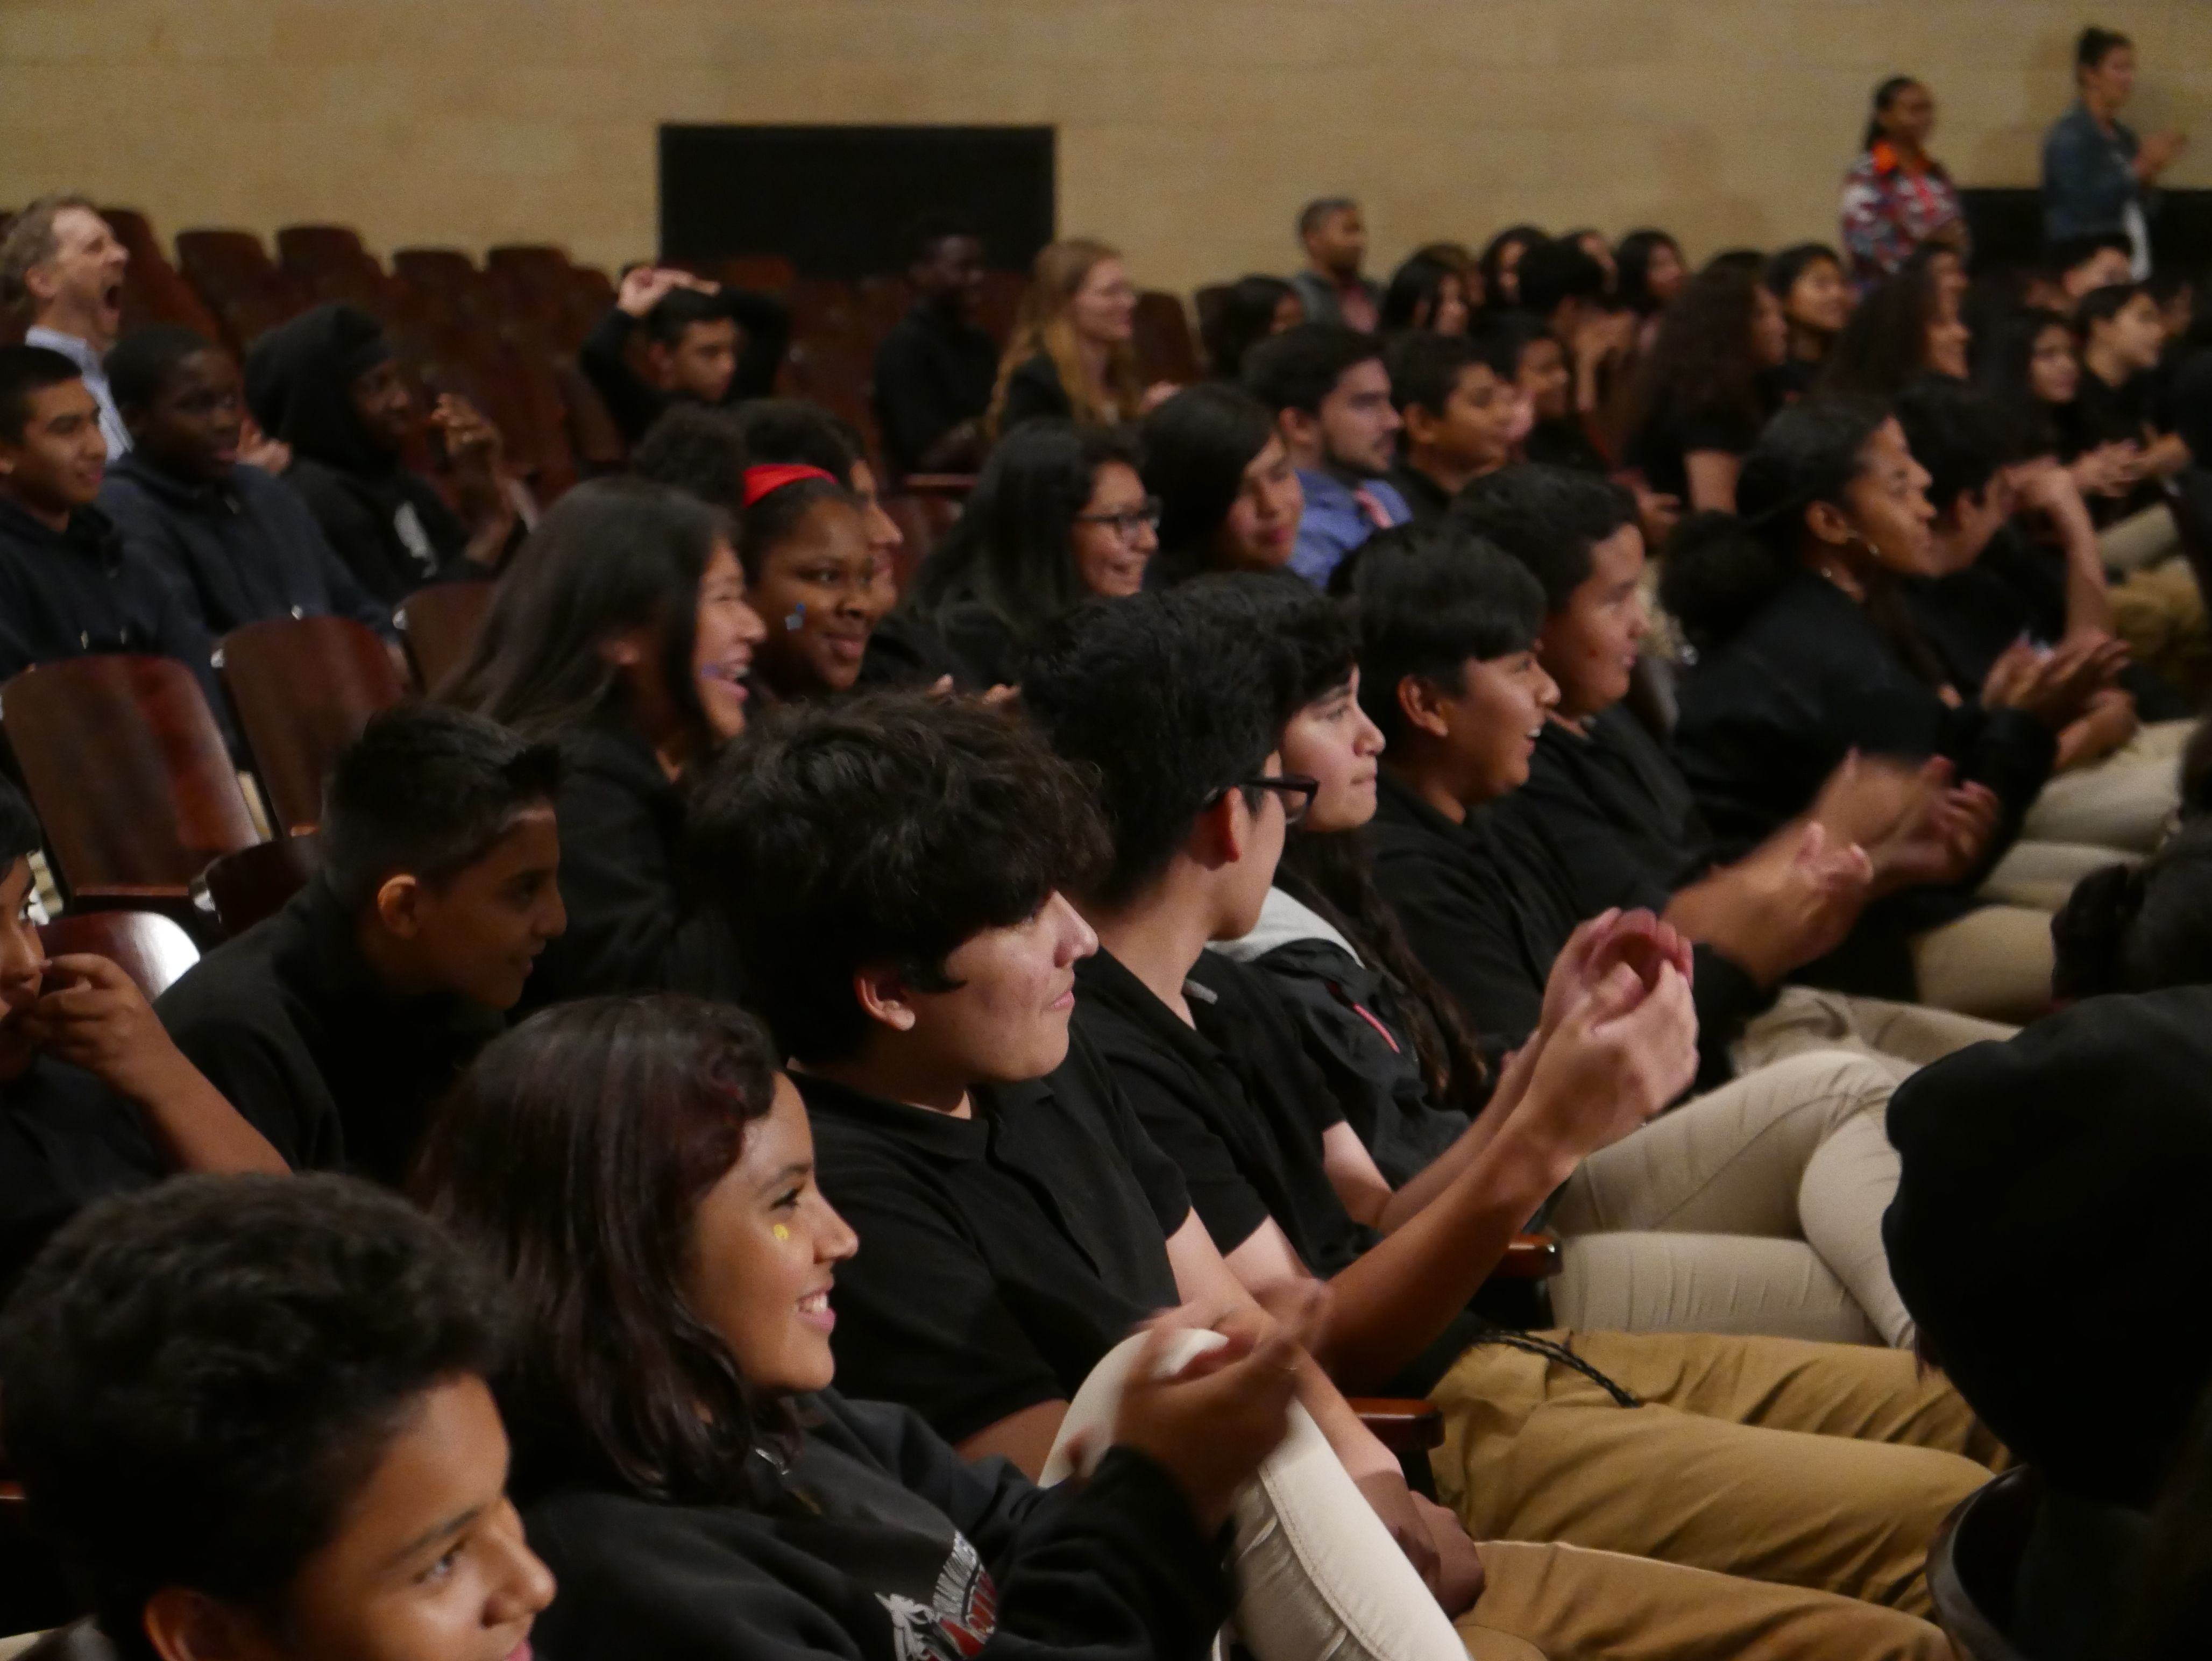 DC high school students watch a screening of Circus Without Borders at Theodore Roosevelt High School. Image by Meerabelle Jesuthasan. USA, 2019.